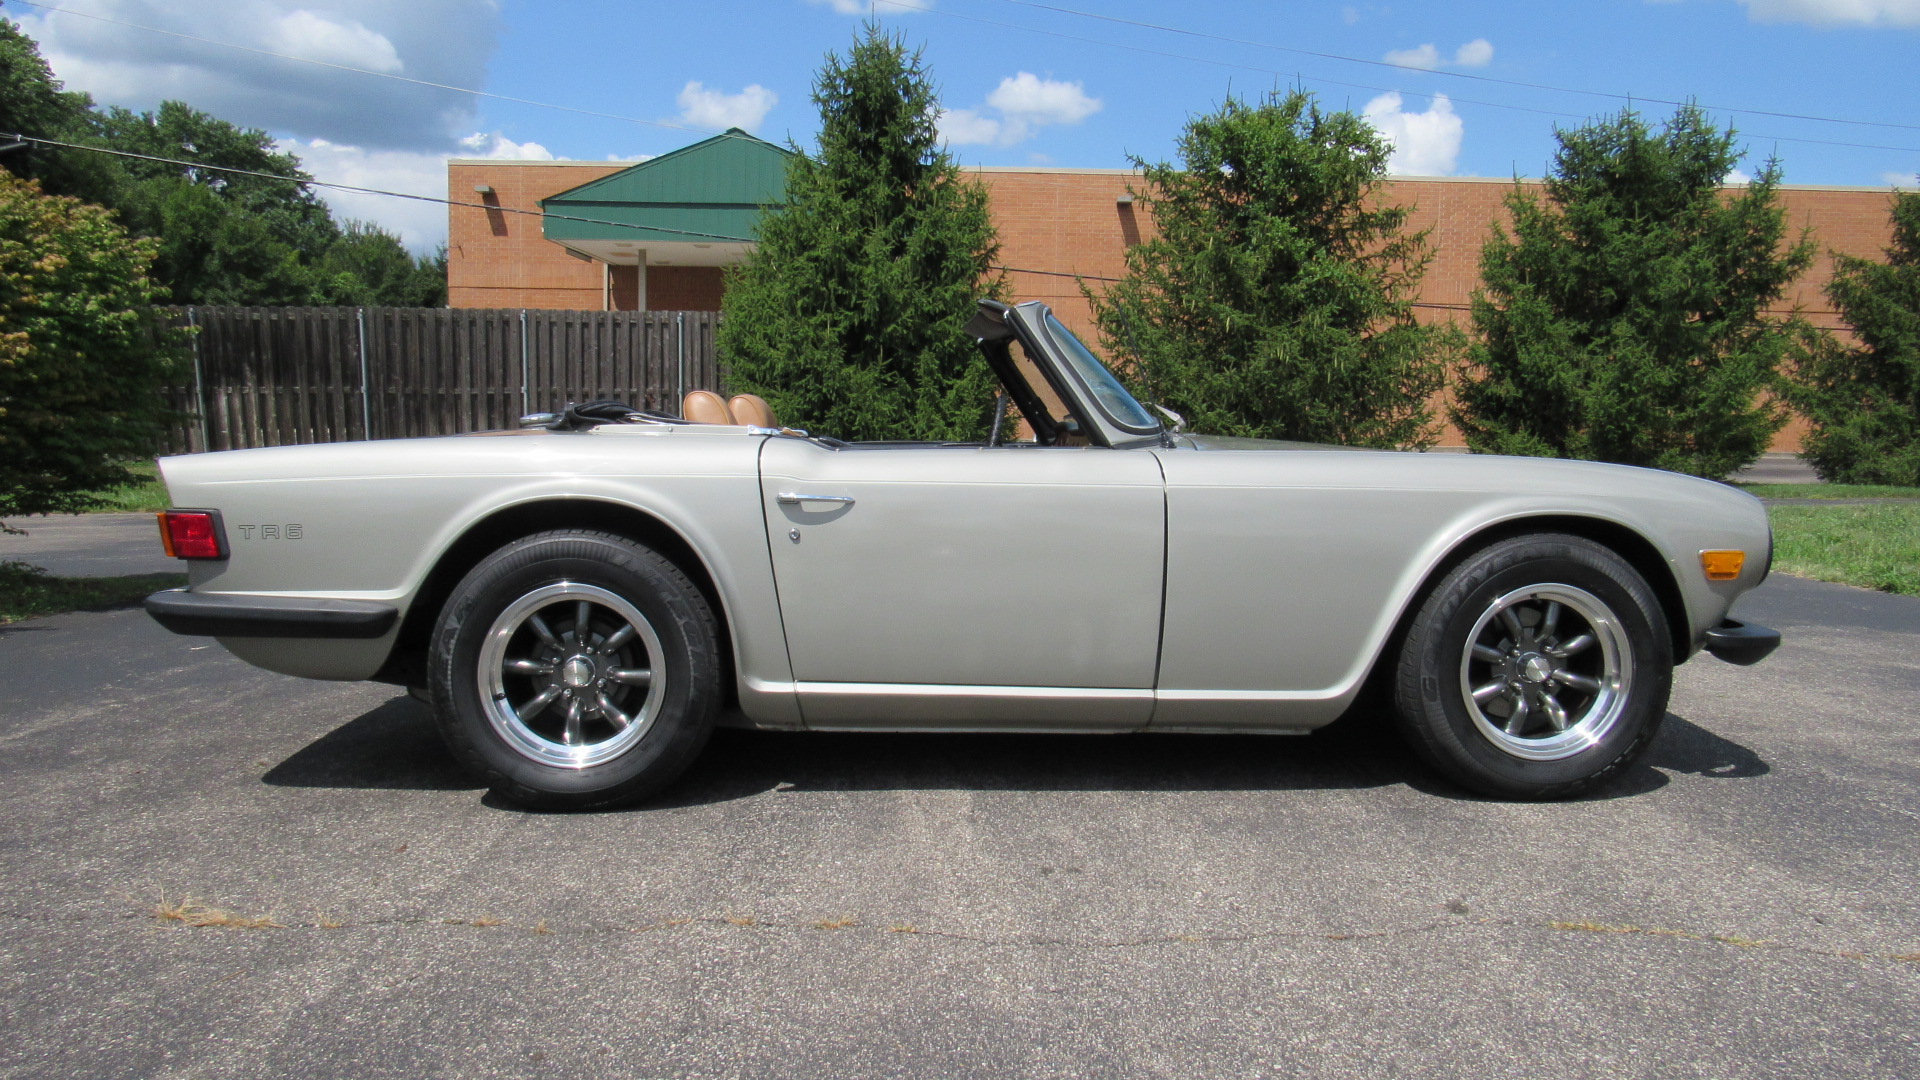 1969 TR6, Overdrive, Fuel Injection, Restored, SOLD!